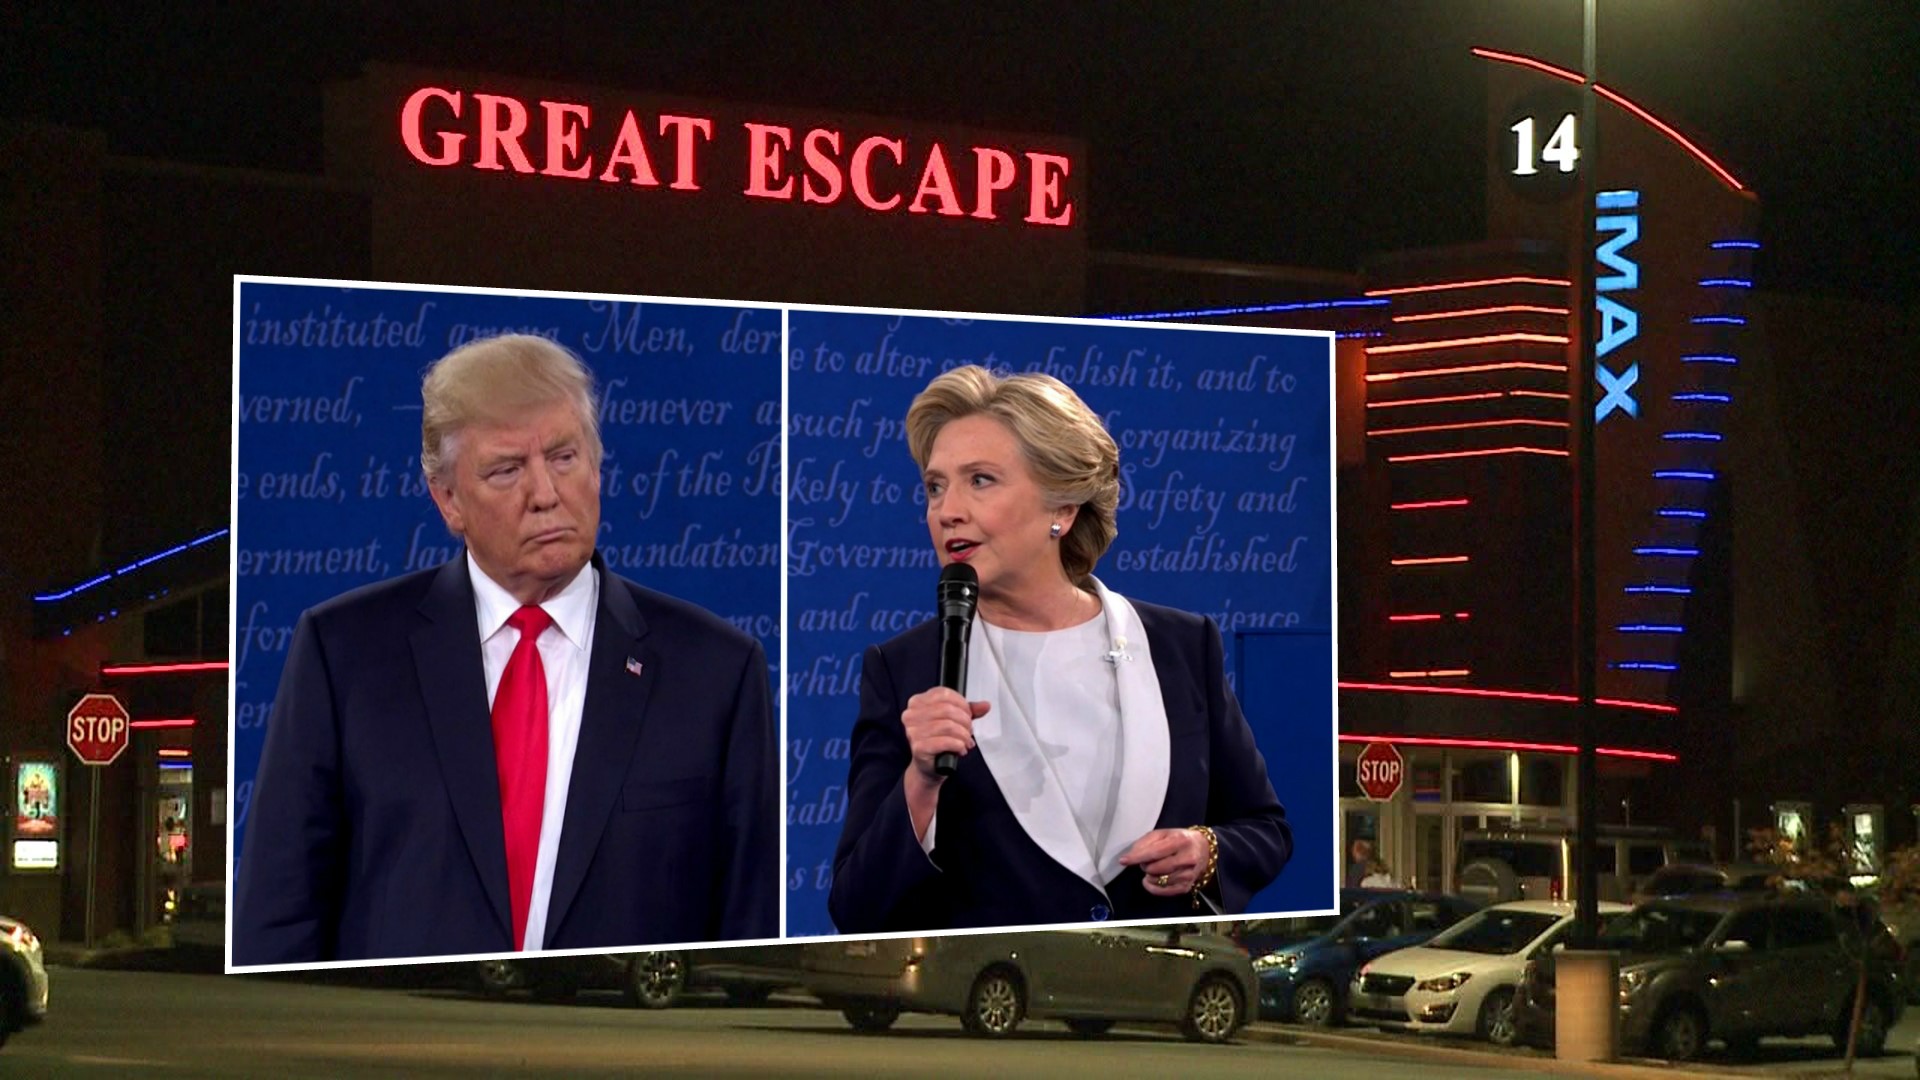 Local Movie Theater Shows Presidential Debate